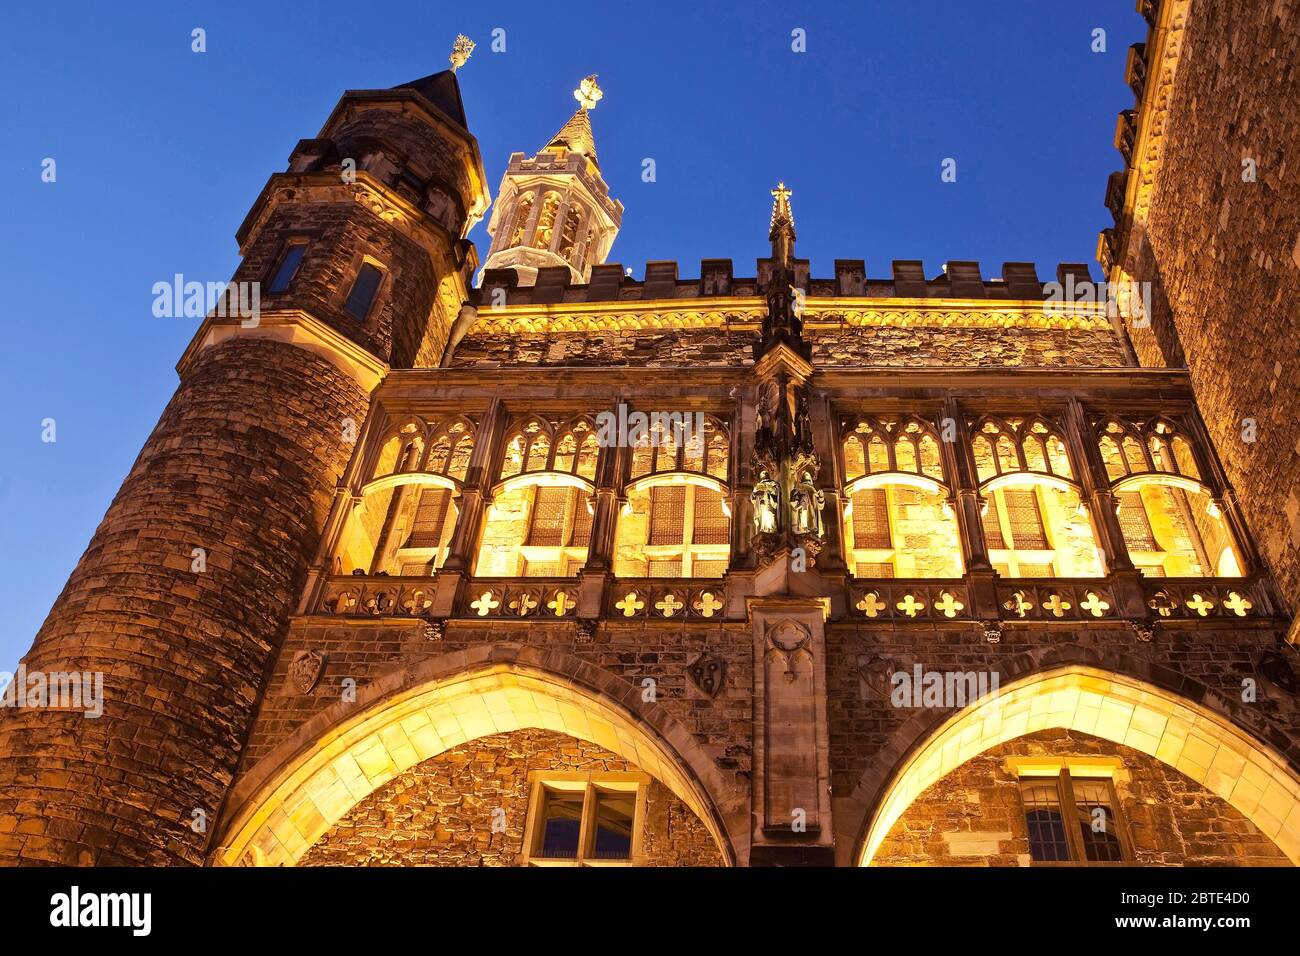 Aachen town hall in the evening, Germany, North Rhine-Westphalia, Aix-la-Chapelle Stock Photo